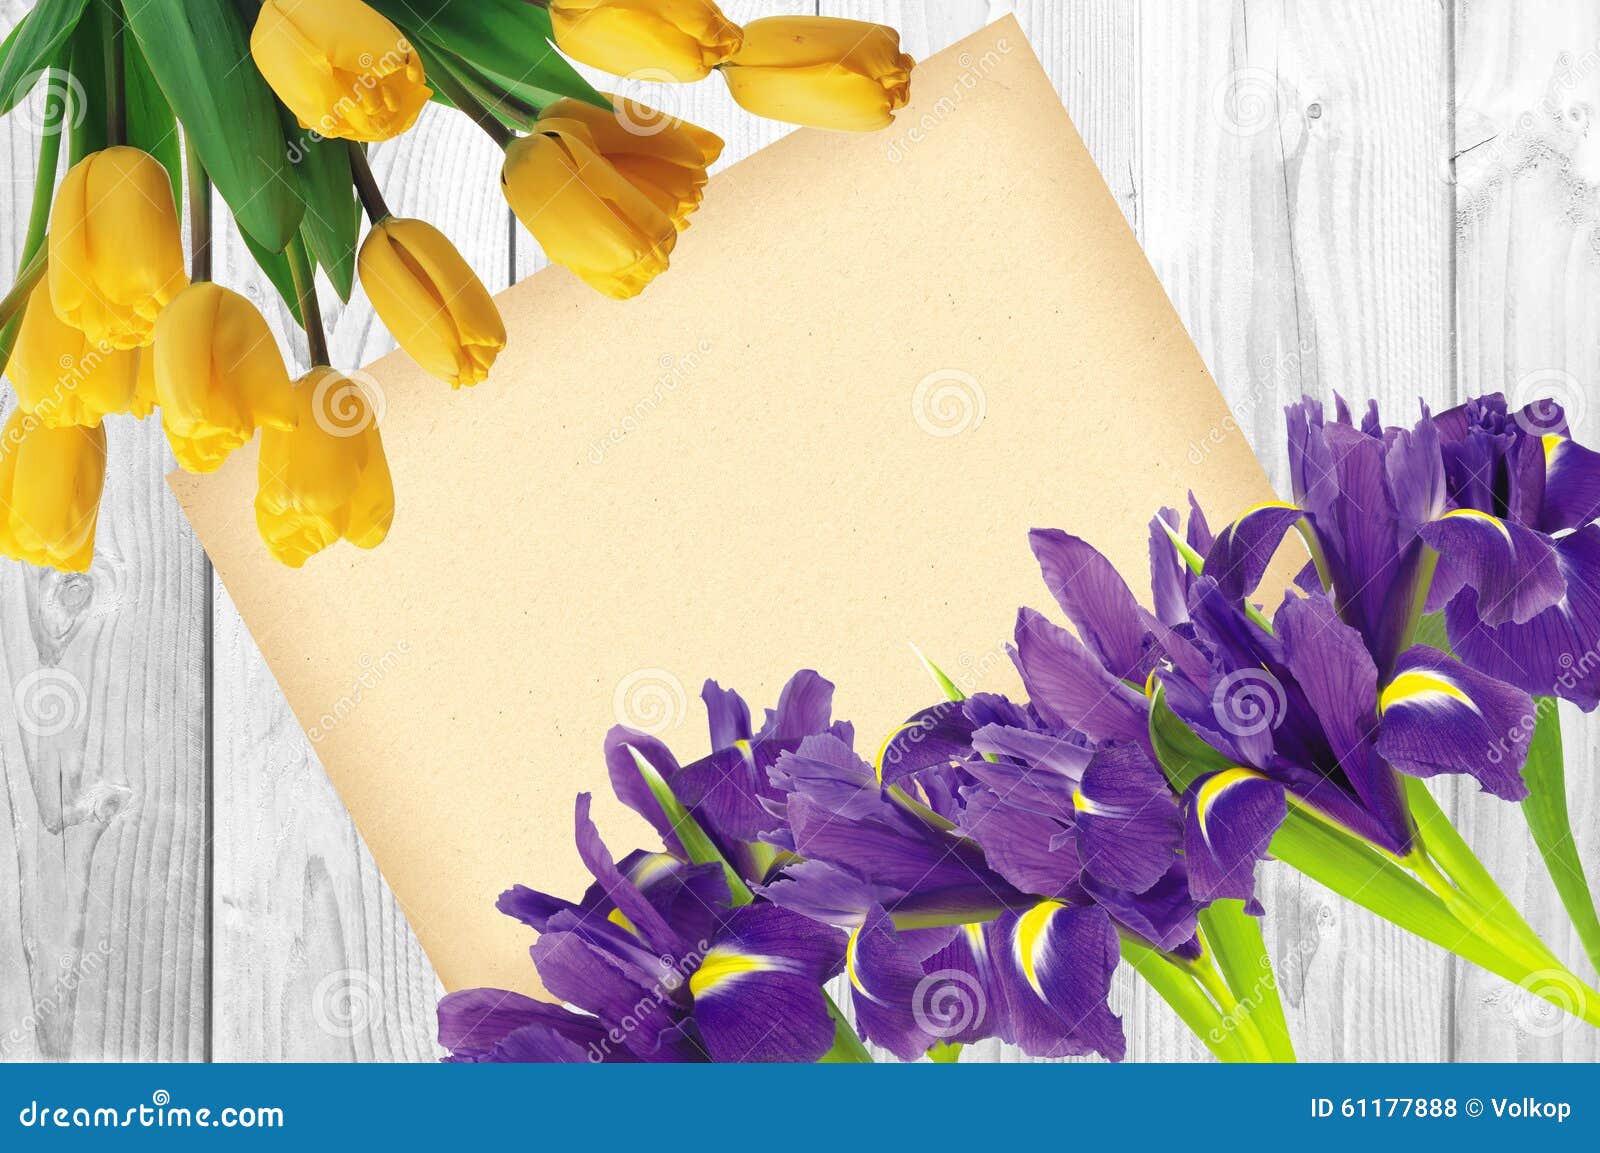 blueflag or iris flower and yellow tulips with greeting card